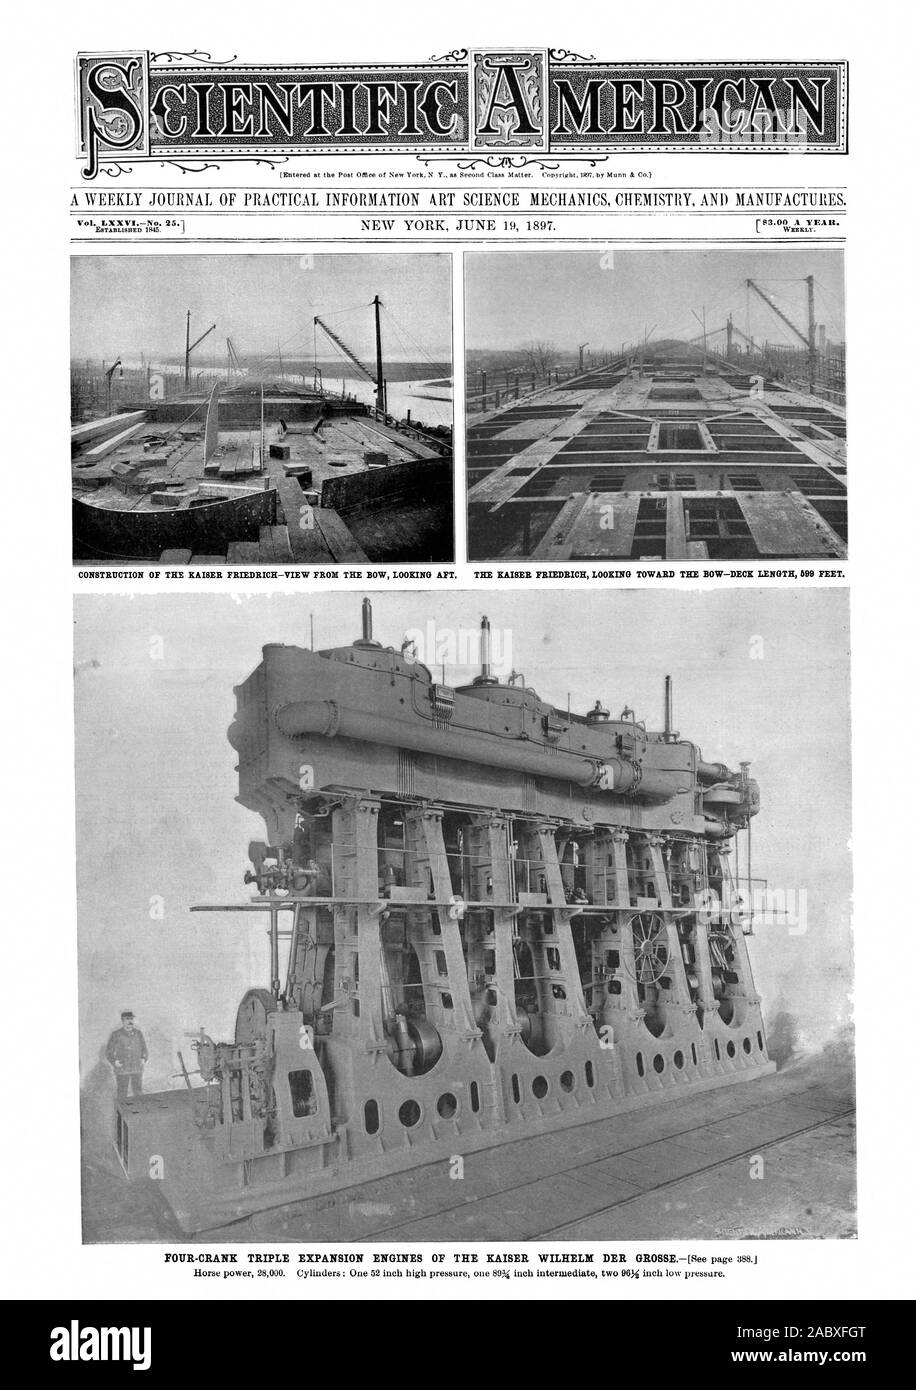 A WEEKLY JOURNAL OF PRACTICAL INFORMATION kRT SCIENCE MECHANICS CHEMISTRY AND MANUFACTURES. Vol. LXXVINo. 25. CONSTRUCTION OF THE RAISER FRIEDRICH—VIEW FROM THE BOW LOOKING AFT. THE KAISER FRIEDRICH LOOKING TOWARD THE BOW—DECK LENGTH 699 FEET., scientific american, 1897-06-19 Stock Photo